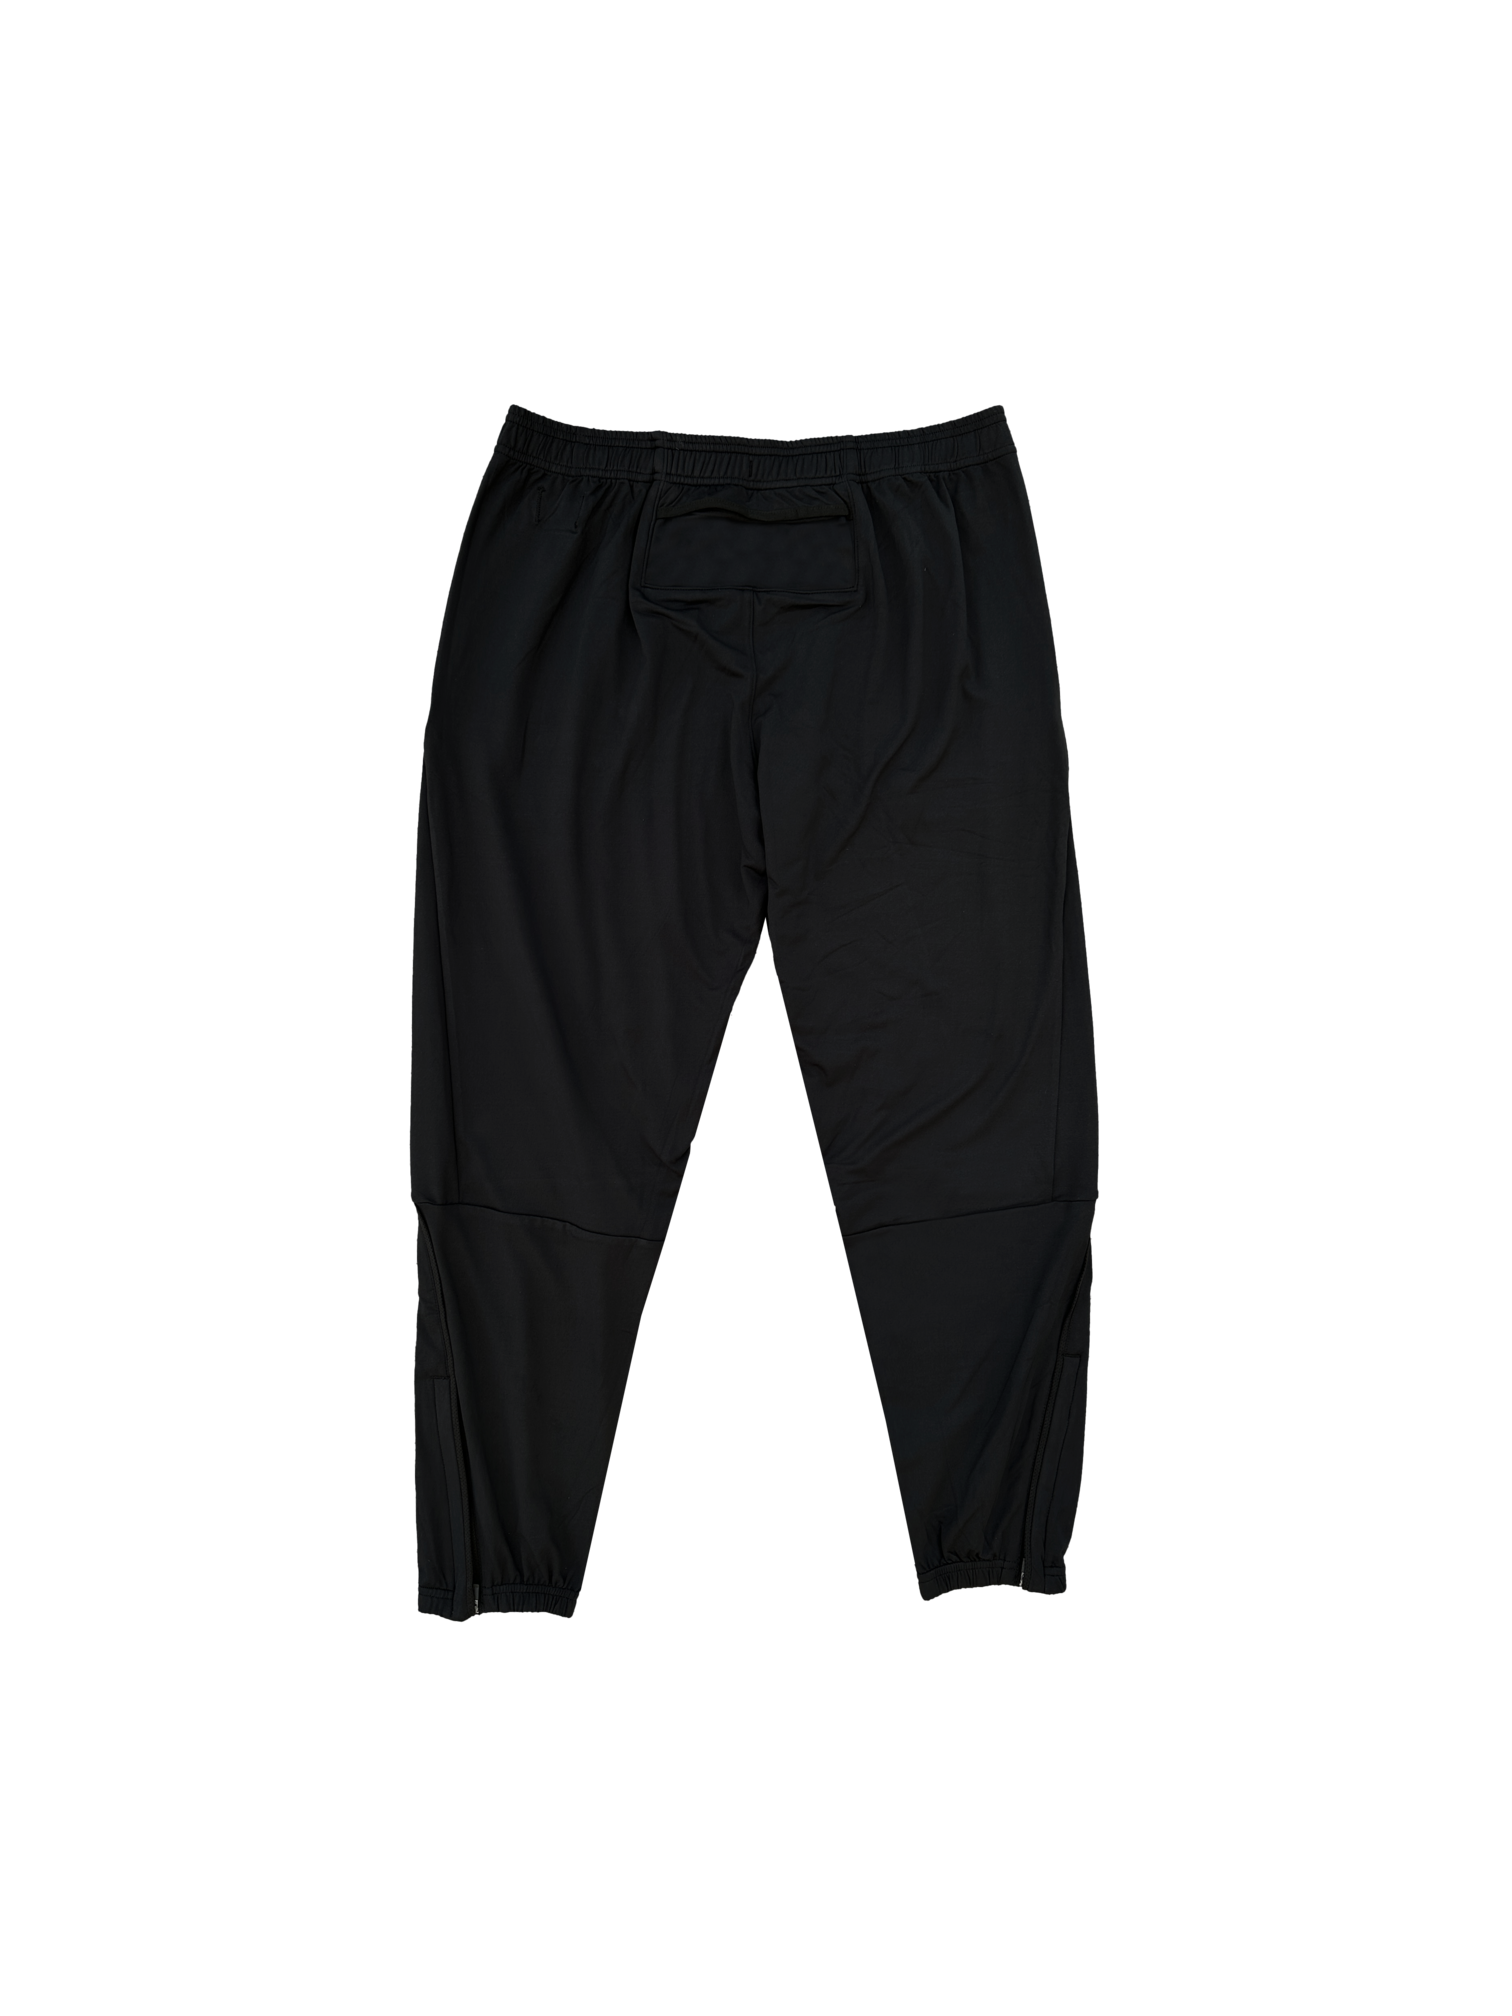 THE ATHLETIC PANTS – ICE ATHLETIC CLUB